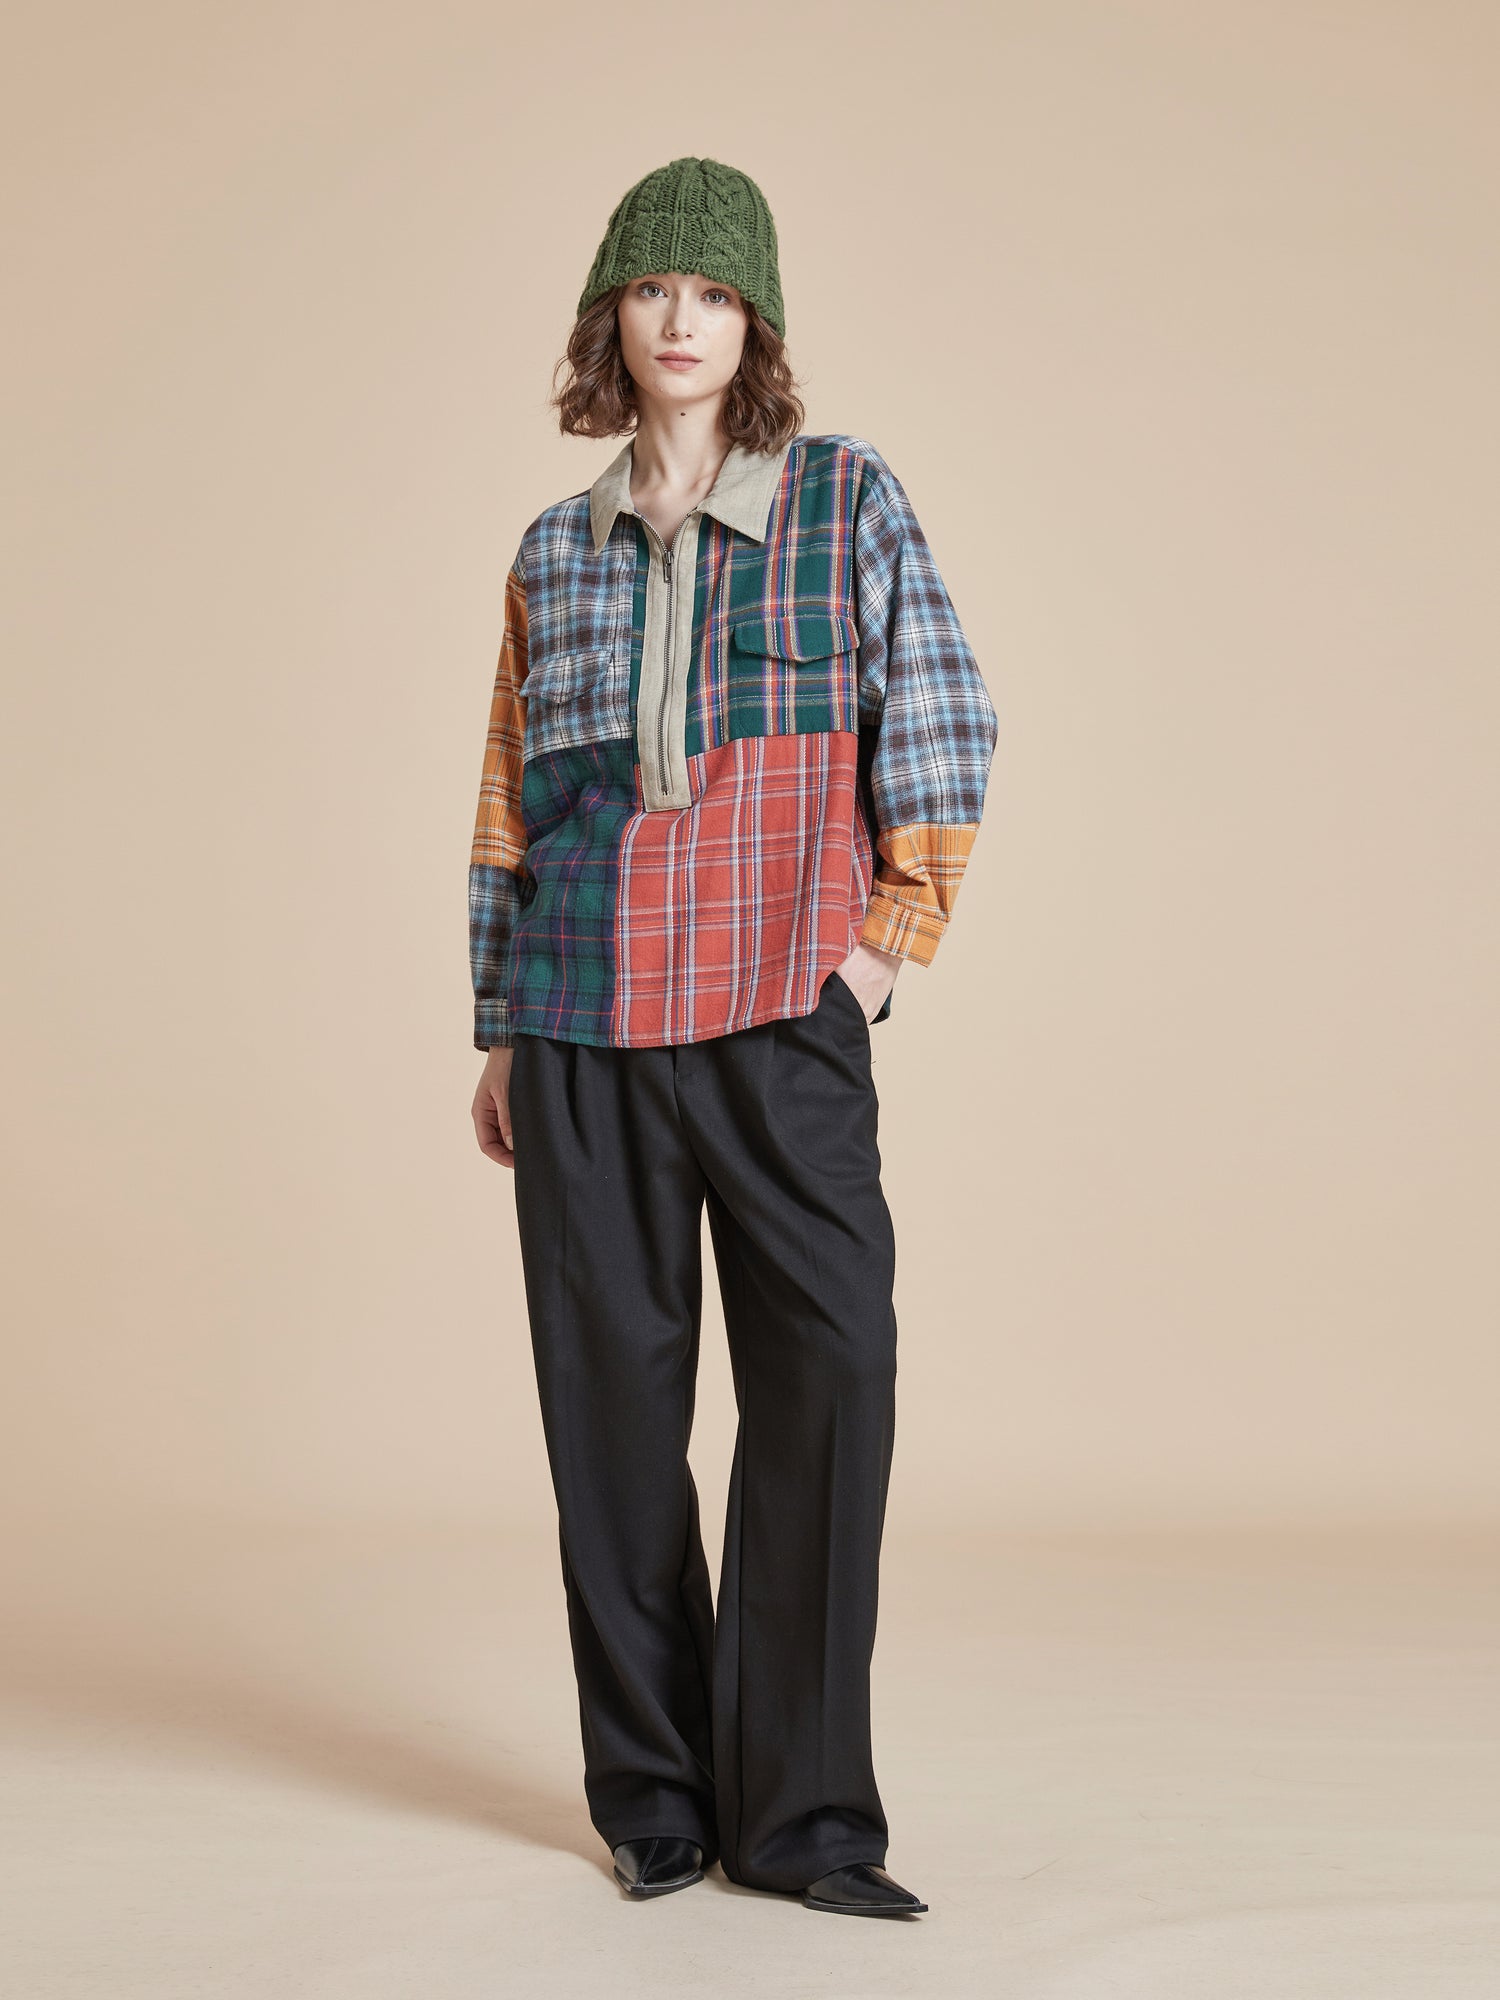 A model wearing a Multi Plaid Tartan Shirt by Found in handcrafted distressing.